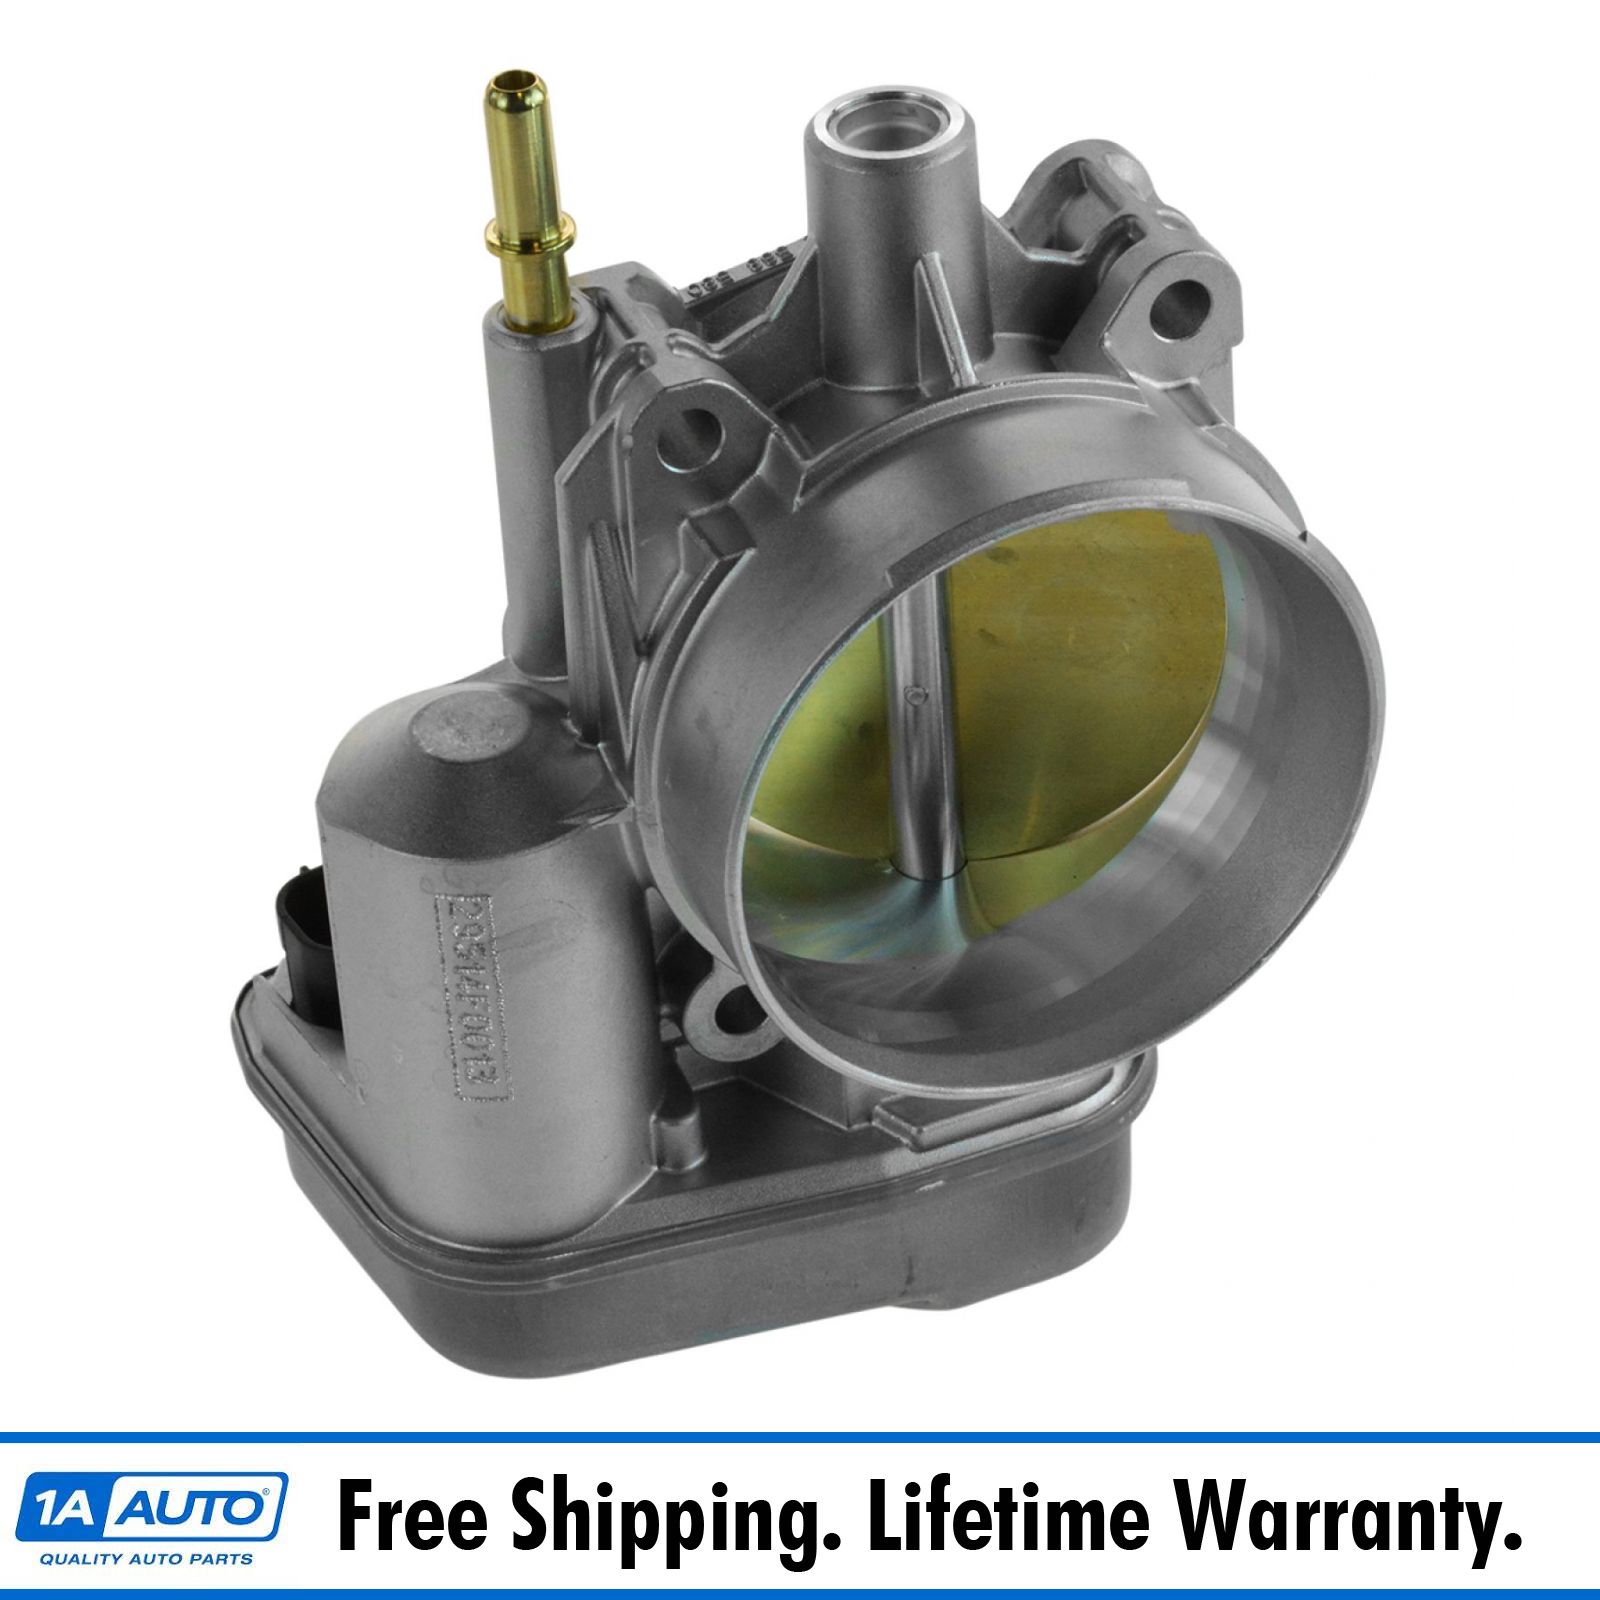 Throttle Body Assembly Replacement Parts for GM GMC Pontiac Hummer Oldsmobile